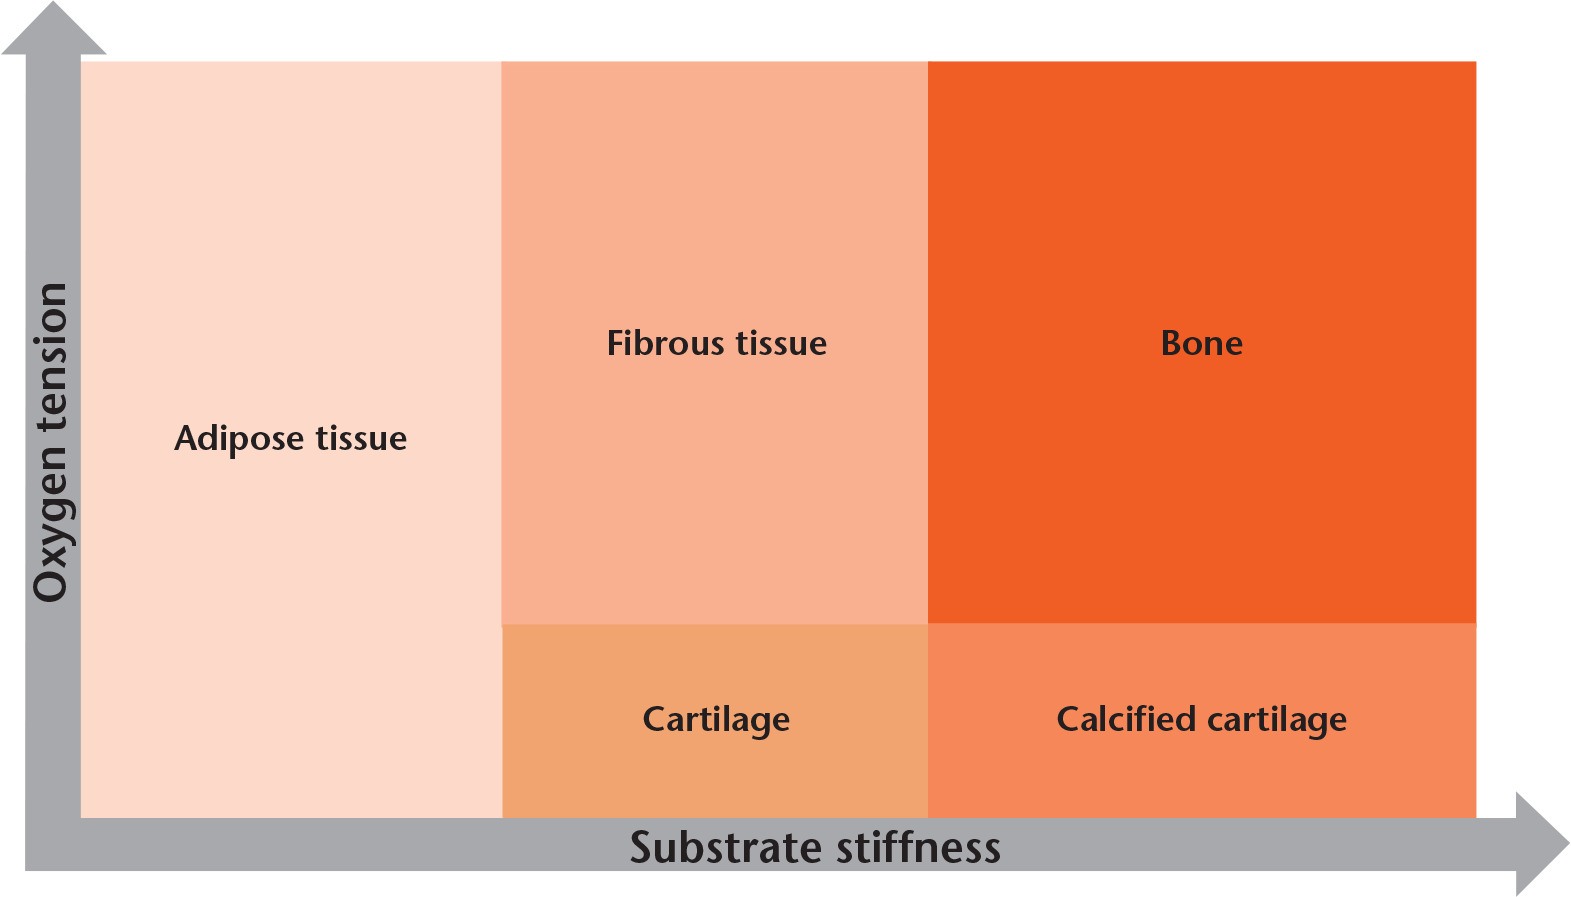 Fig. 7 
          Mesenchymal stromal cells (MSCs) are able to differentiate into adipose, fibrous or bone tissue depending on the substrate stiffness; a stiffer substrate favours bone formation. Successful bone formation also depends on the oxygen tension. A lack of oxygen leads to cartilage formation. These differentiation properties have prompted numerous research projects in which the substrate qualities were used to steer cell differentiation.
        